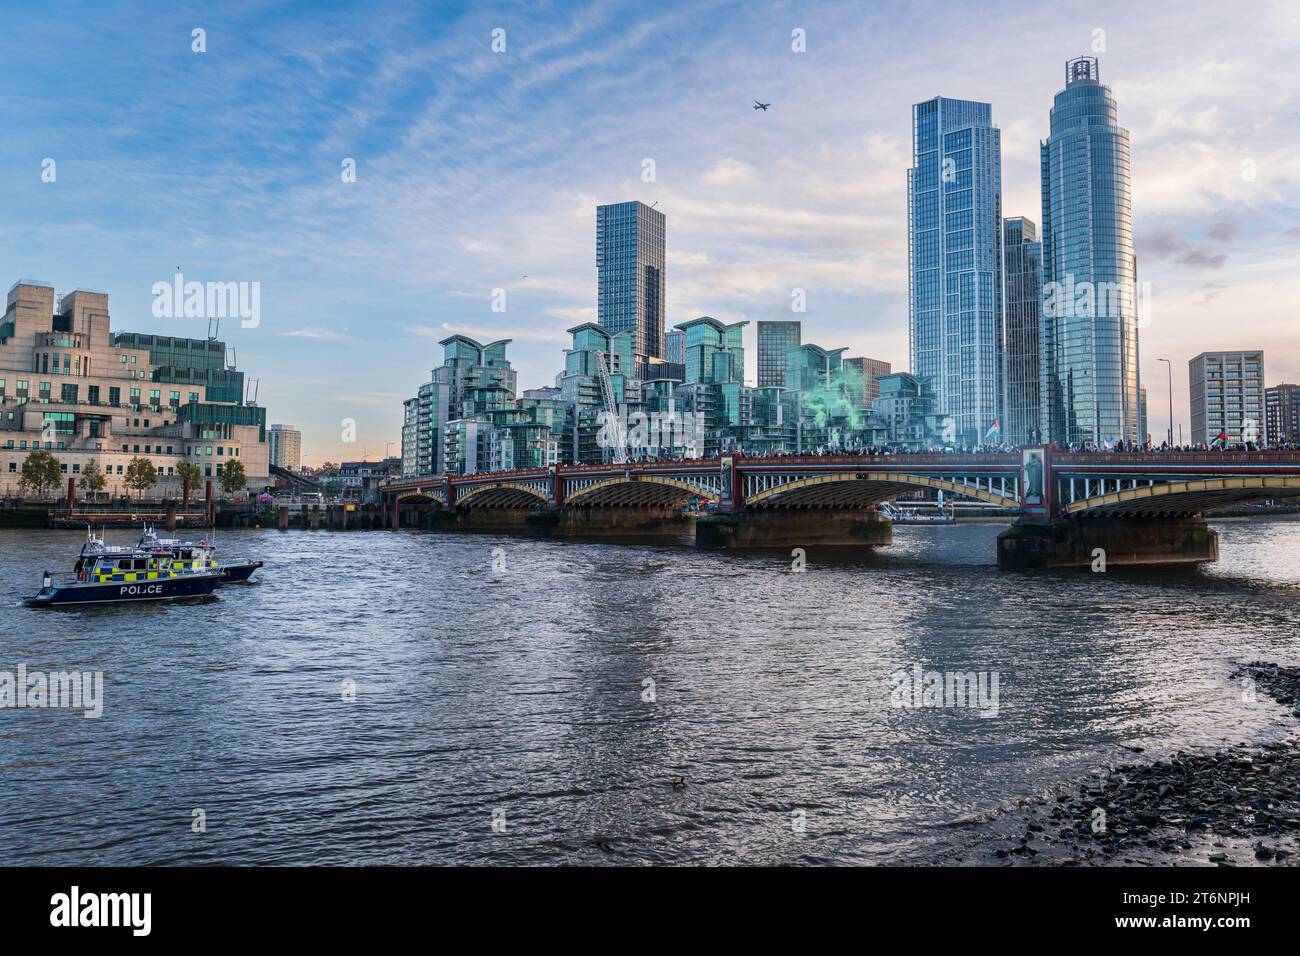 London, UK, November 11, 2023. A protest proceeding from Park Lane to the US Embassy, supporting the Palestinian cause in the Hamas-Israel conflict. Here the crowds cross Vauxhall Bridge, by the MI6 building. An airliner flies overhead. A Police Boat watches on. (Tennessee Jones - Alamy Live News) Stock Photo